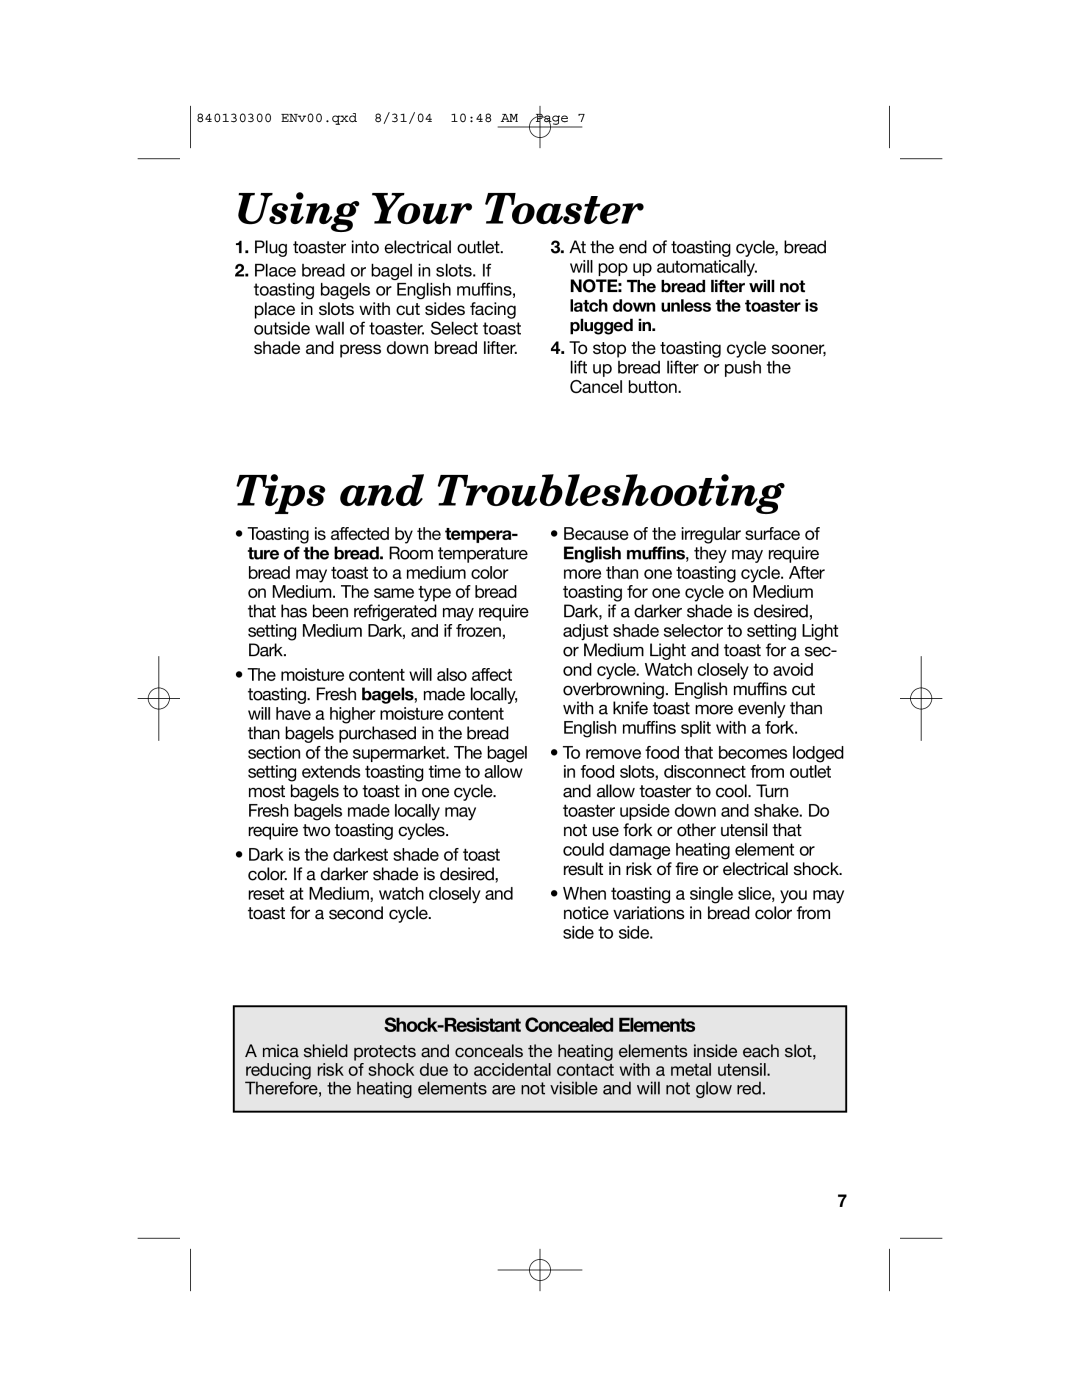 Hamilton Beach All-Metal Toasters manual Using Your Toaster, Tips and Troubleshooting, Shock-ResistantConcealed Elements 